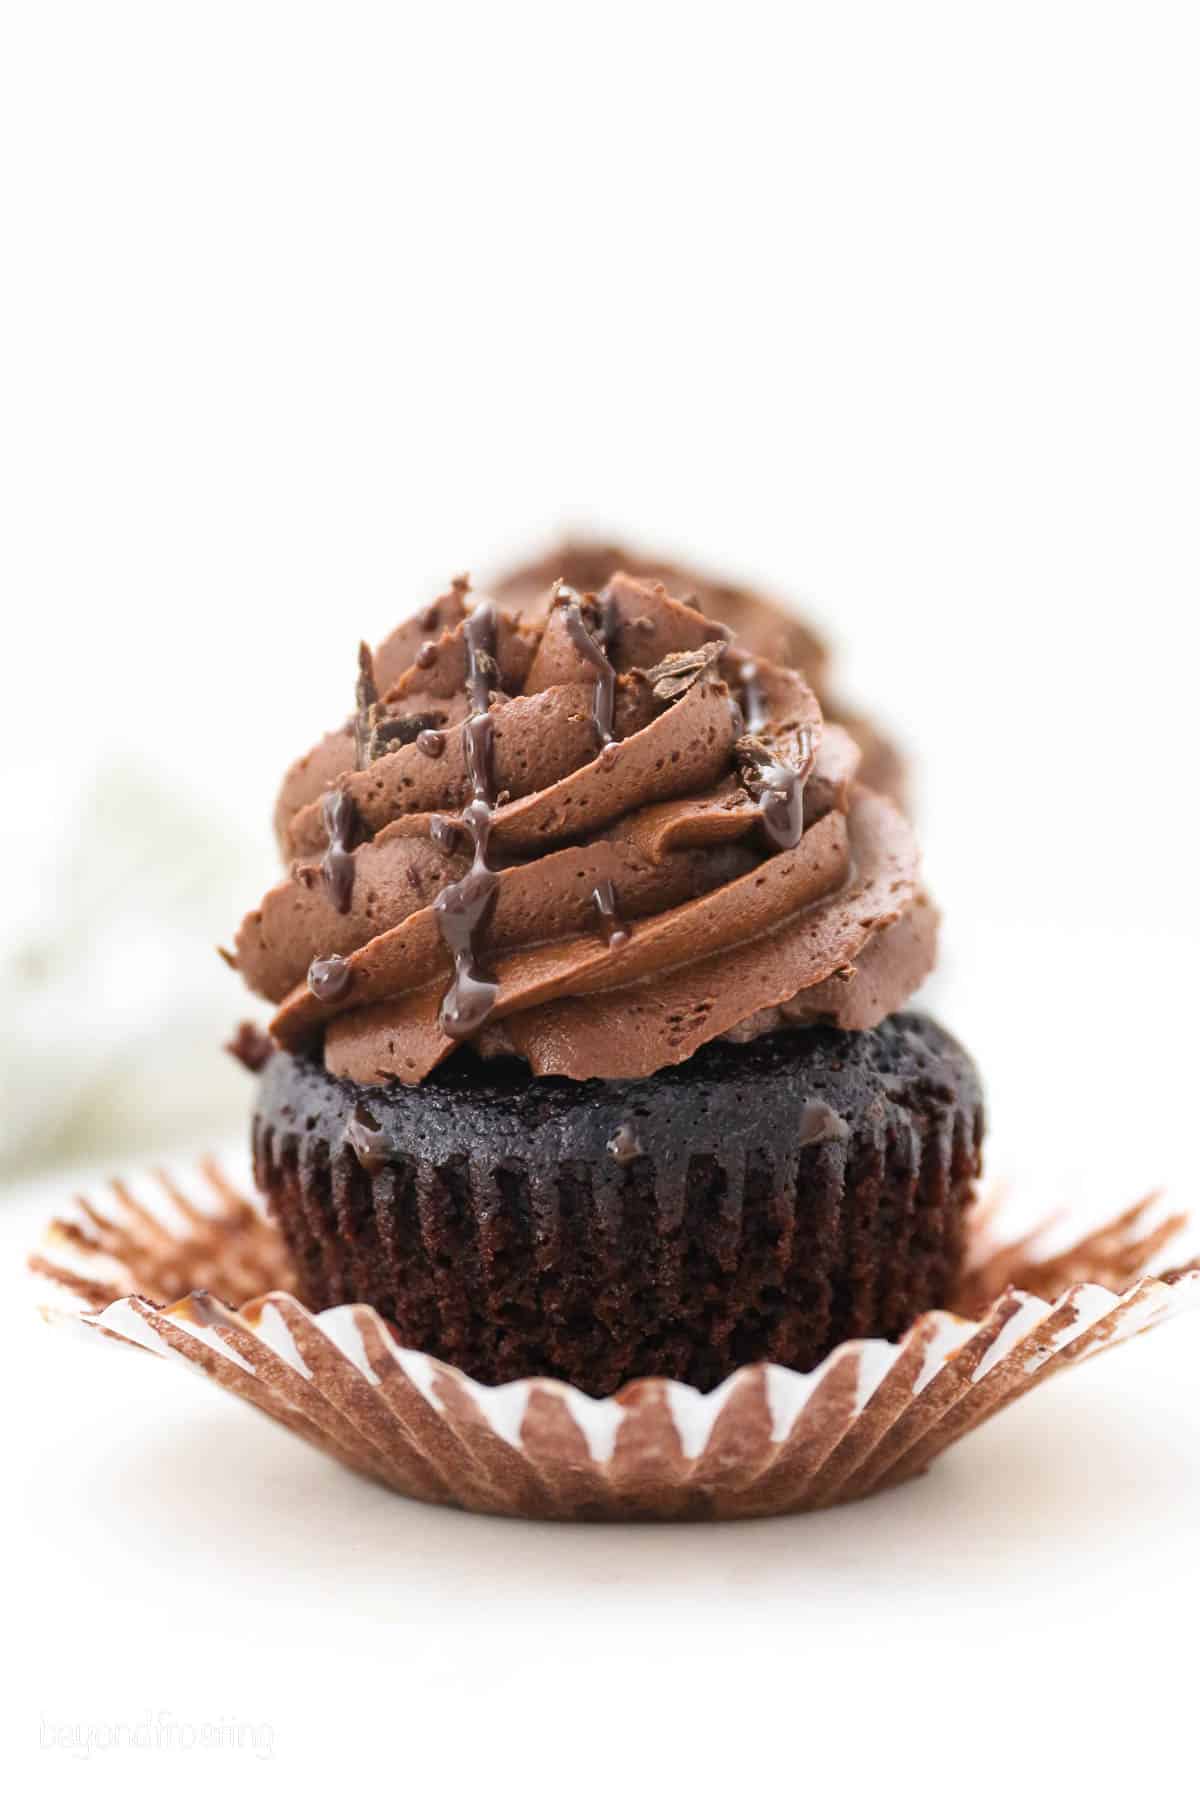 A frosted chocolate ganache cupcake with the liner partially unwrapped and drizzled with chocolate.